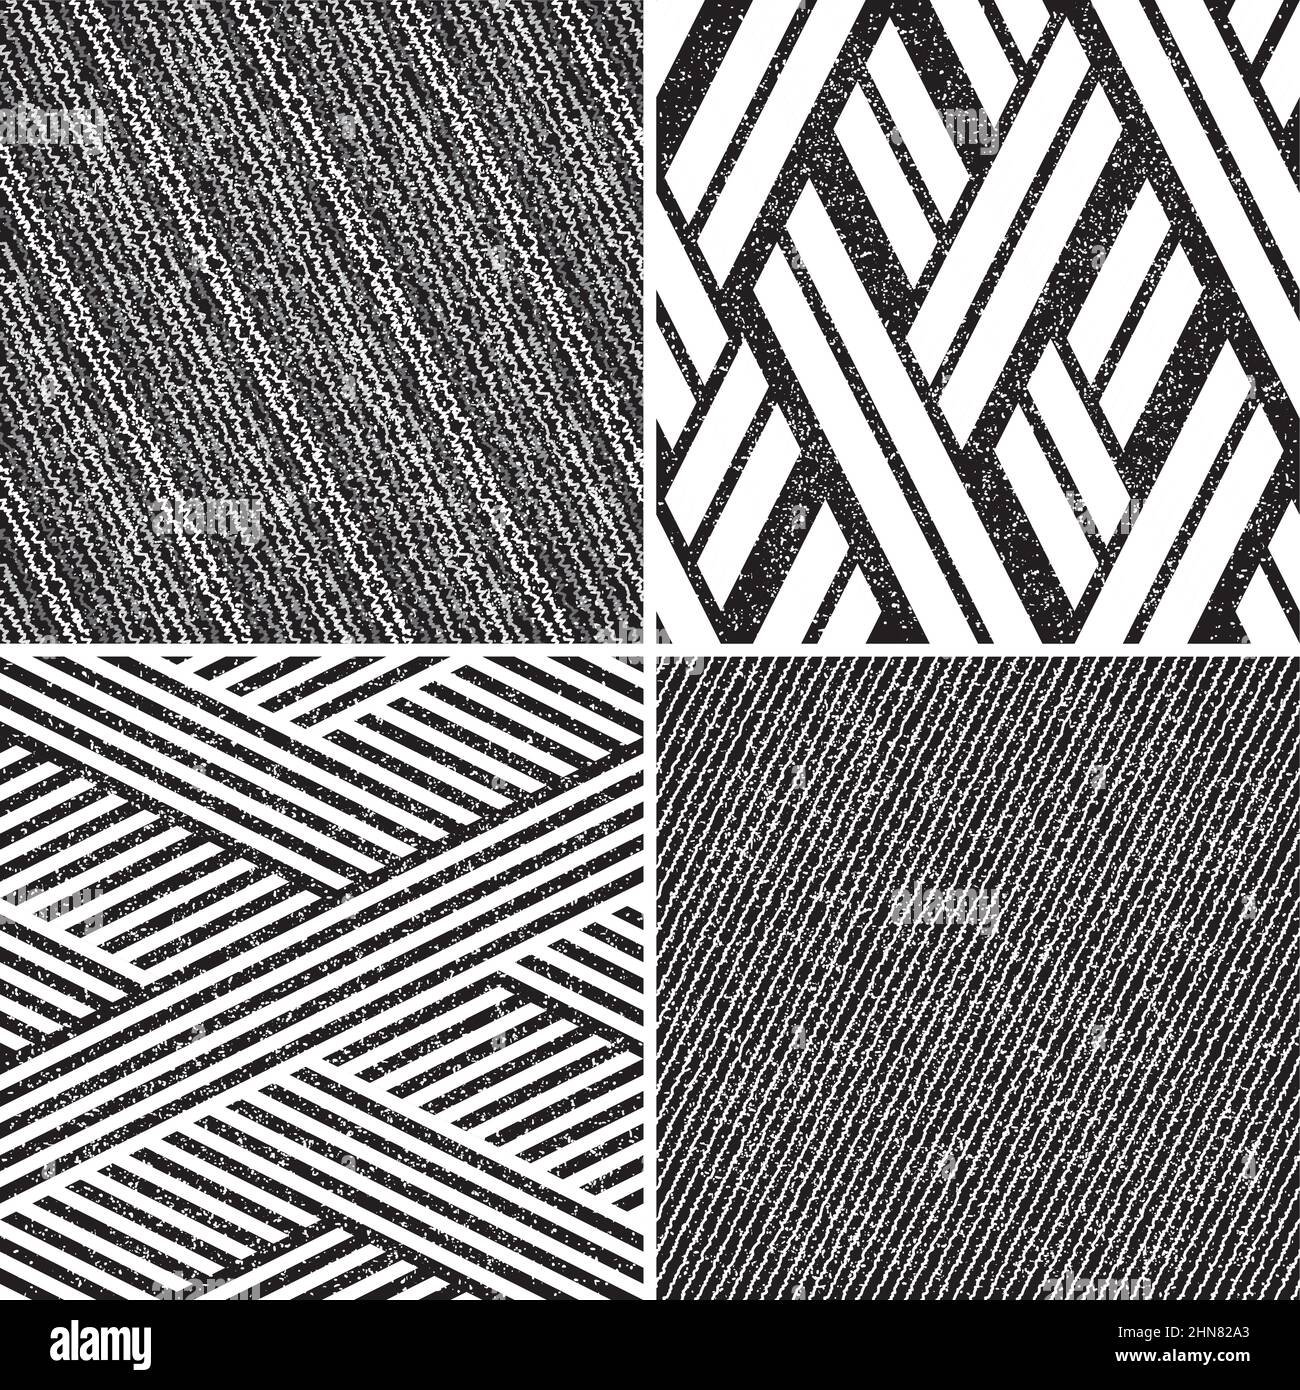 4 different vector patterns in the same package(eps). One pattern is paid and 3 are free (white dividing lines) Stock Vector